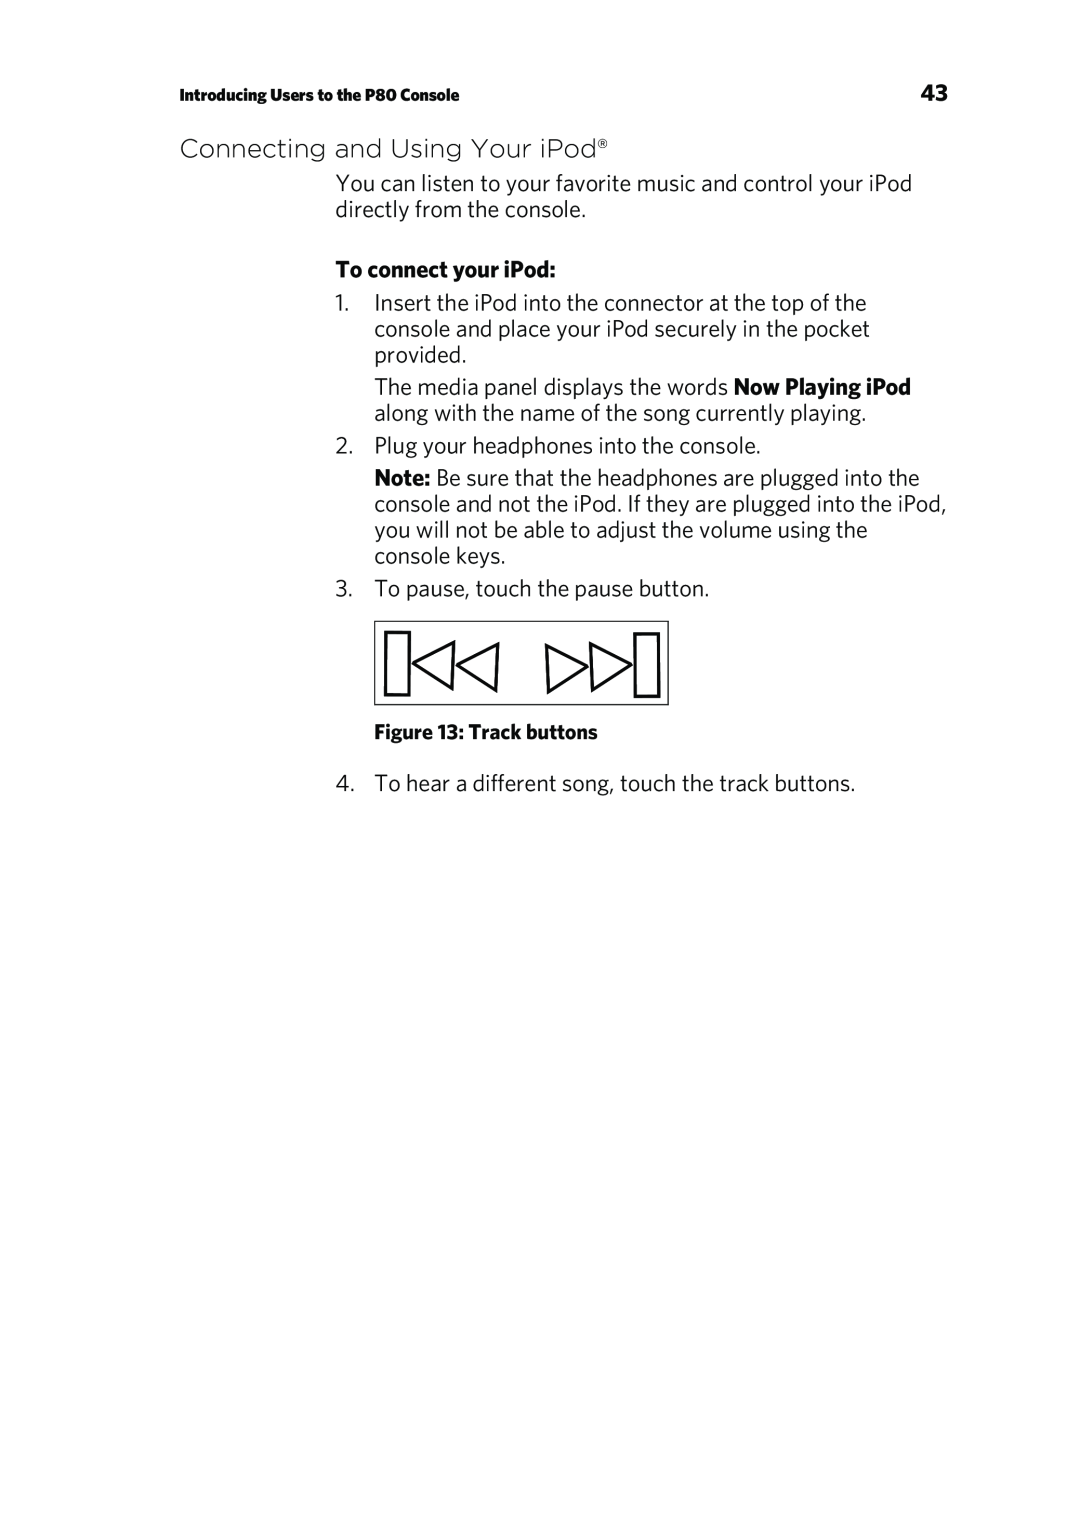 Precor P80 manual Connecting and Using Your iPod, To connect your iPod 